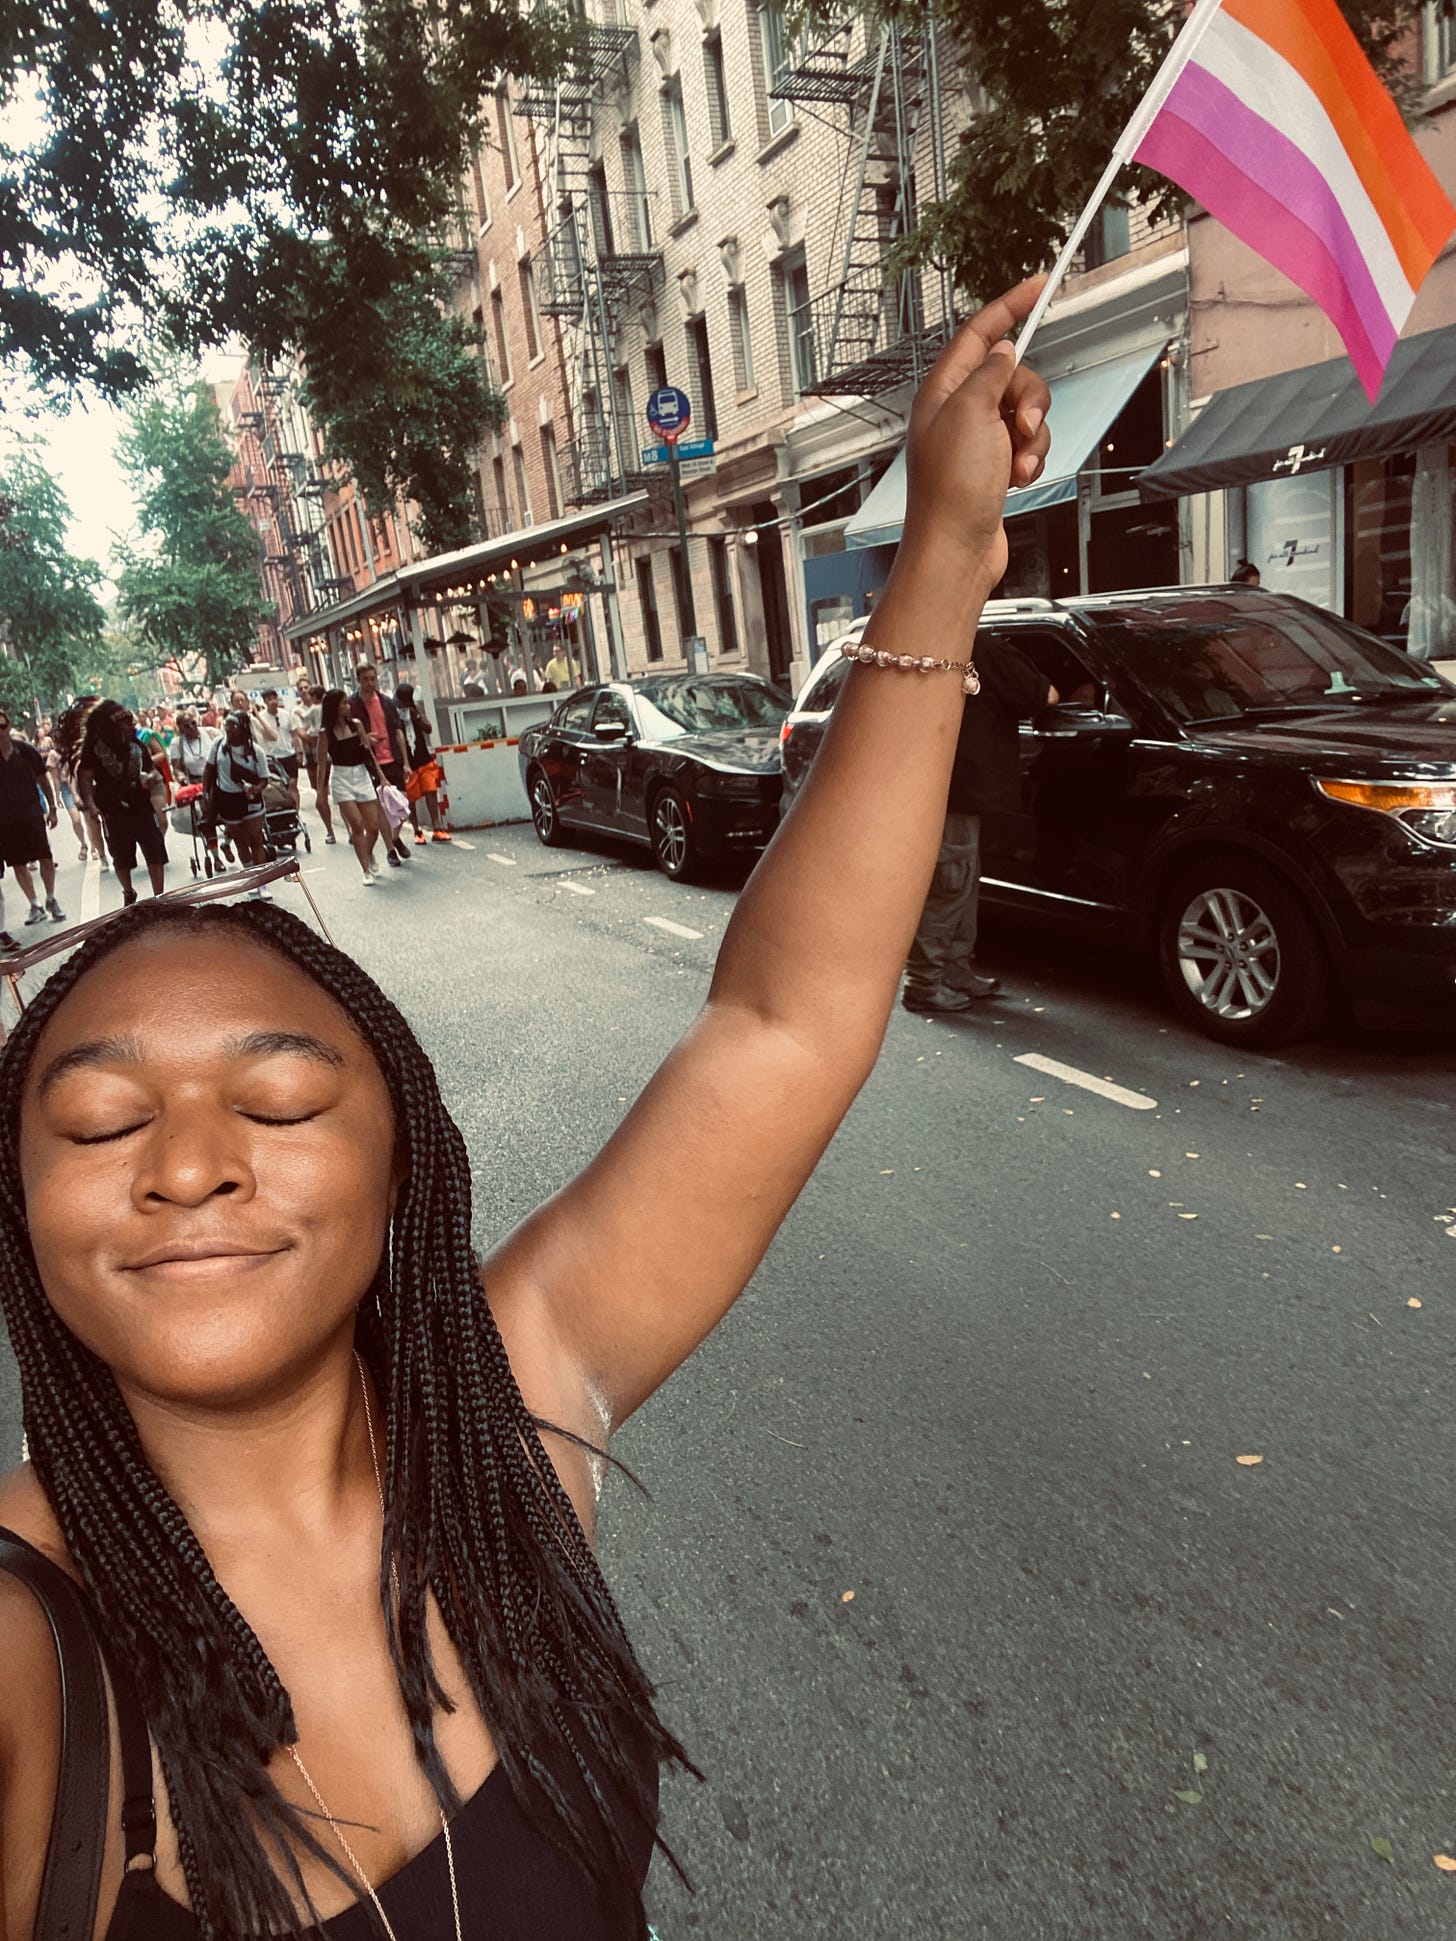 Alexa is holding up the lesbian pride flag (even though she identifies as bi) in the middle of a closed street in the west village. her eyes are closed and she is smiling peacefully. there is a crowd of people a few feet behind her.